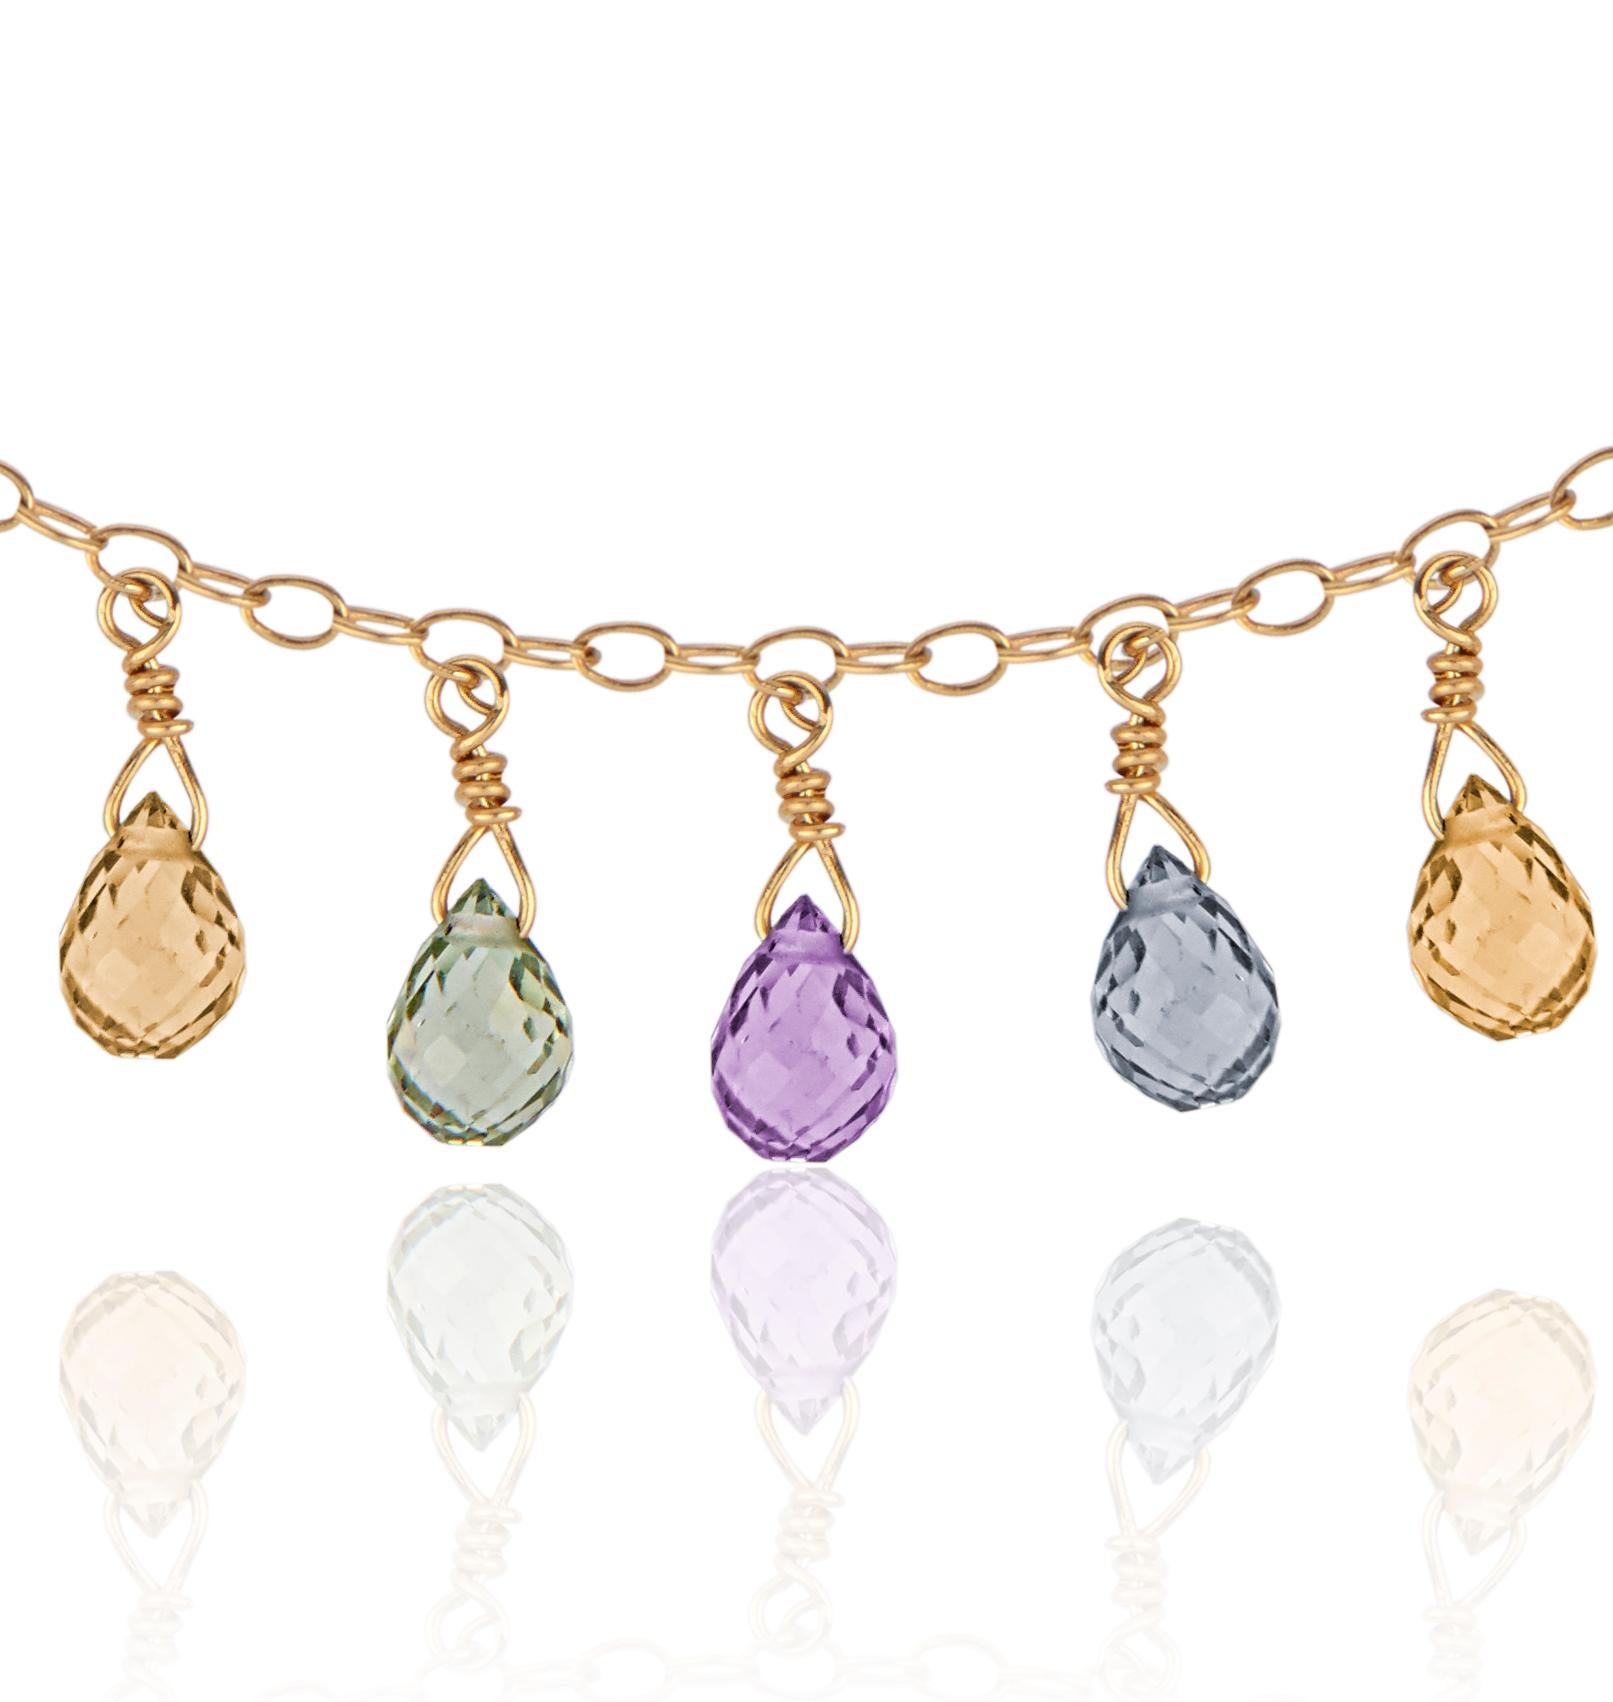 Sapphires in Rain Drop Shapes Dangle From a Delicate 18K Yellow Gold Chain. Custom-designed with Hand-Crafted Toggle Clasp in 22k Yellow Gold. Handcrafted by Susan Mancuso of Forge & Foundry Jewels.